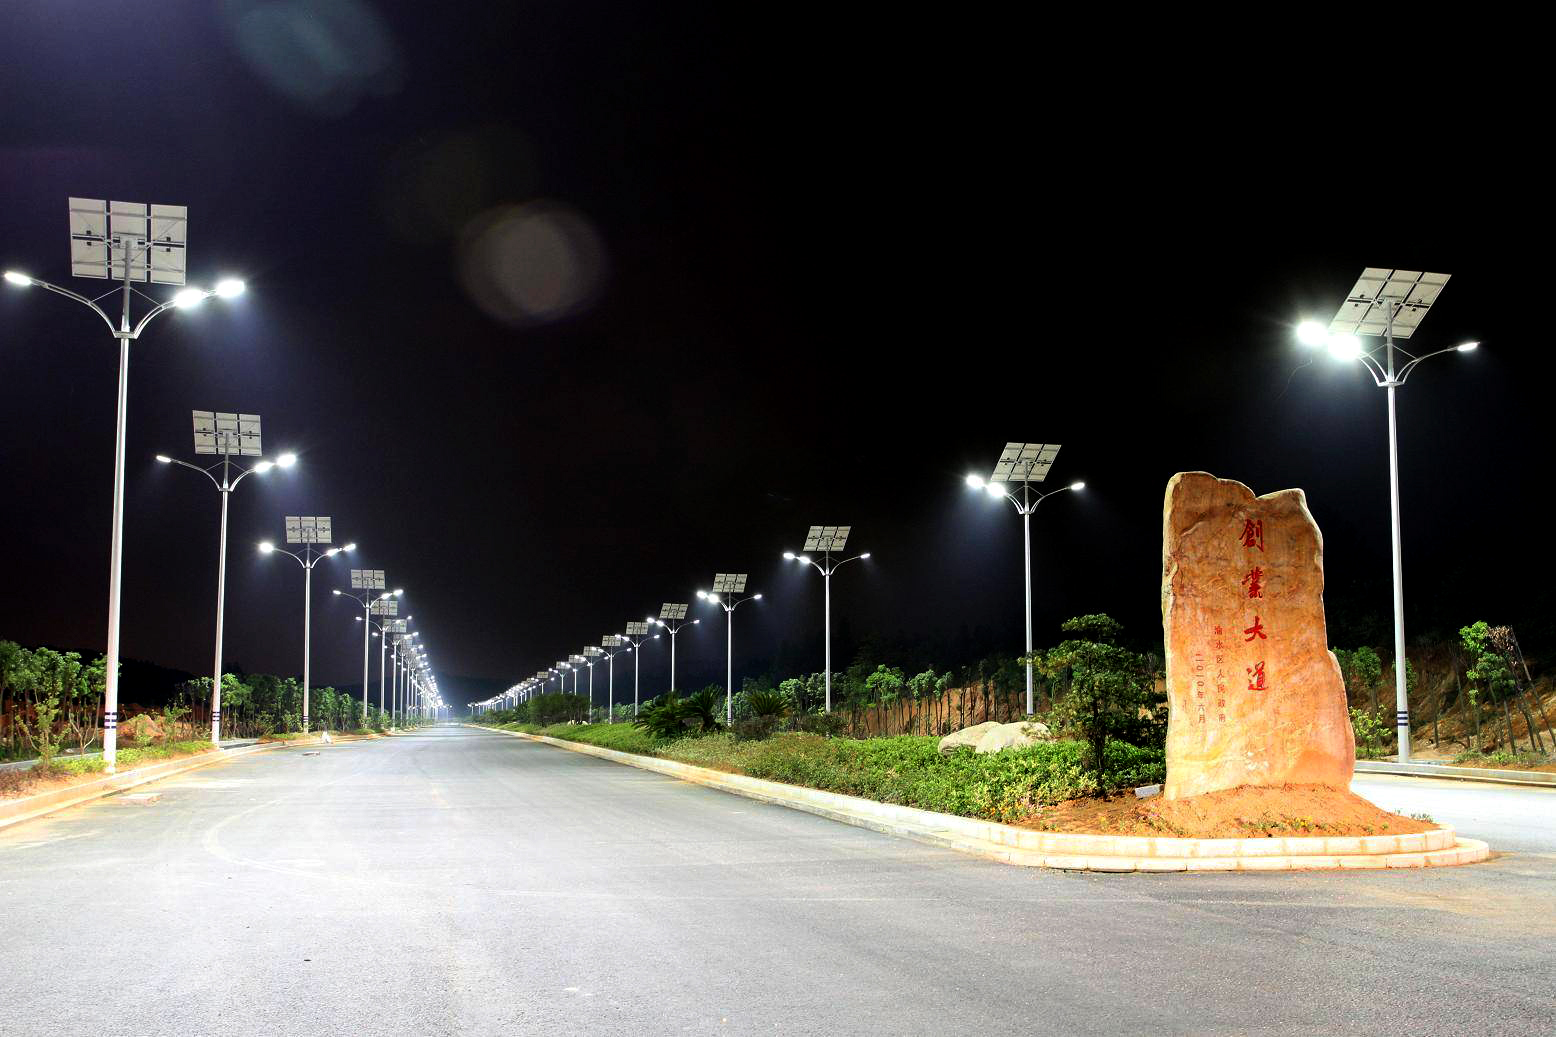 Street Lights Wallpapers High Quality | Download Free